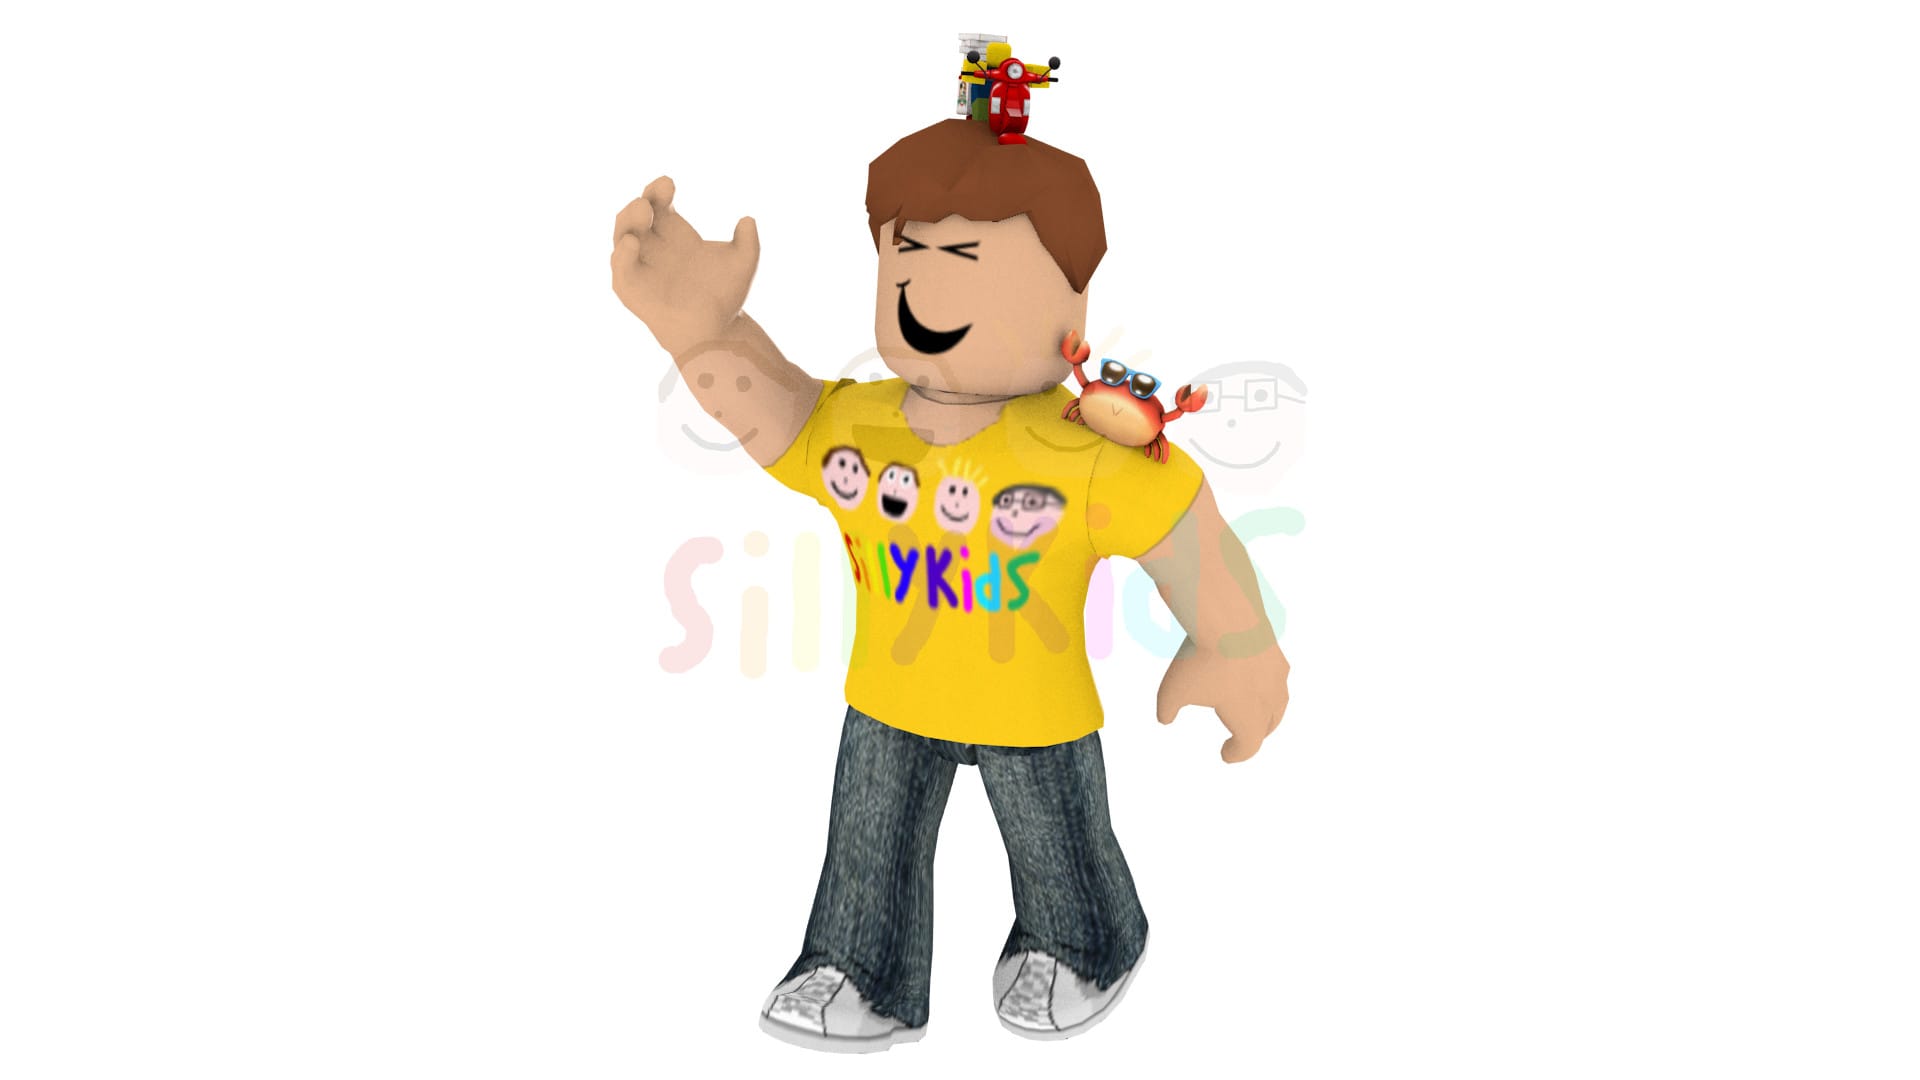 Make You A Roblox Character Render With Accessories By Realsillykids - roblox sit animation r15